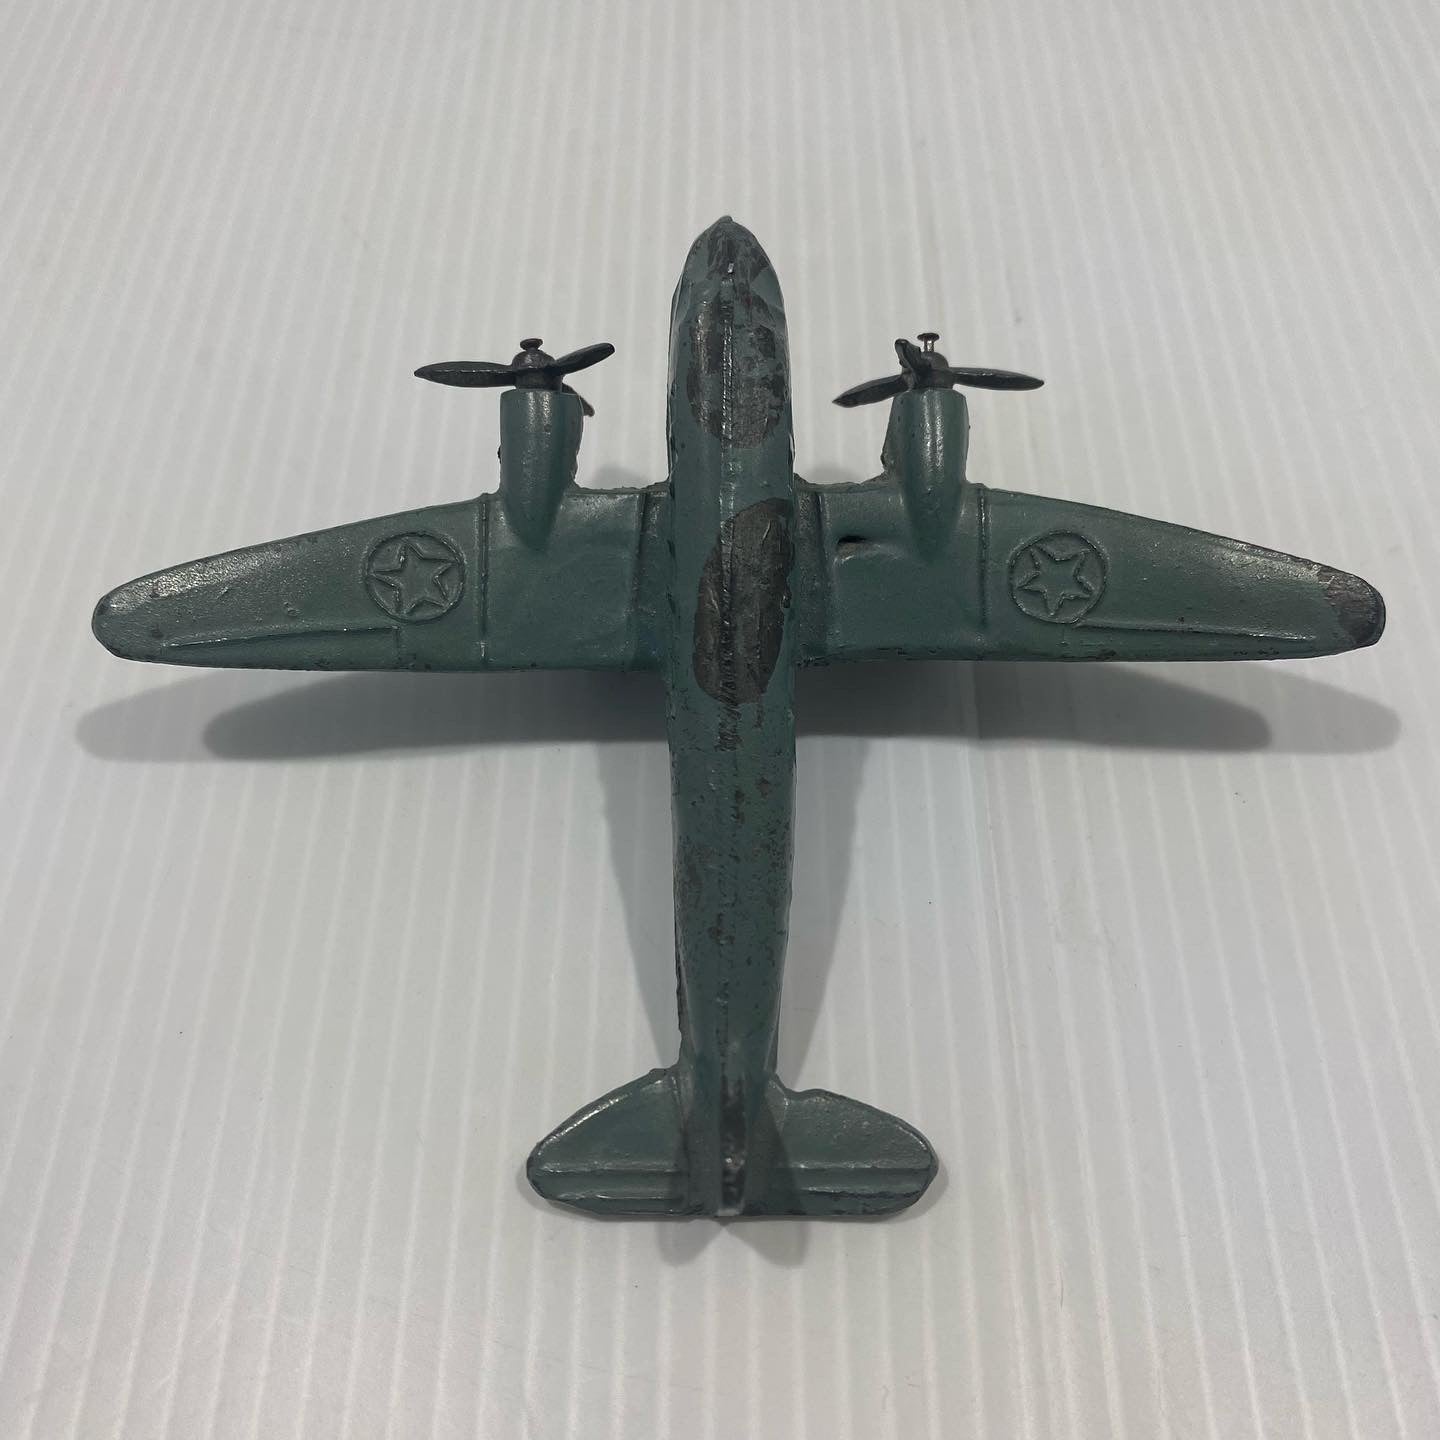 Vintage United Boeing Cast Iron Airplane made in mexico in the 50s.